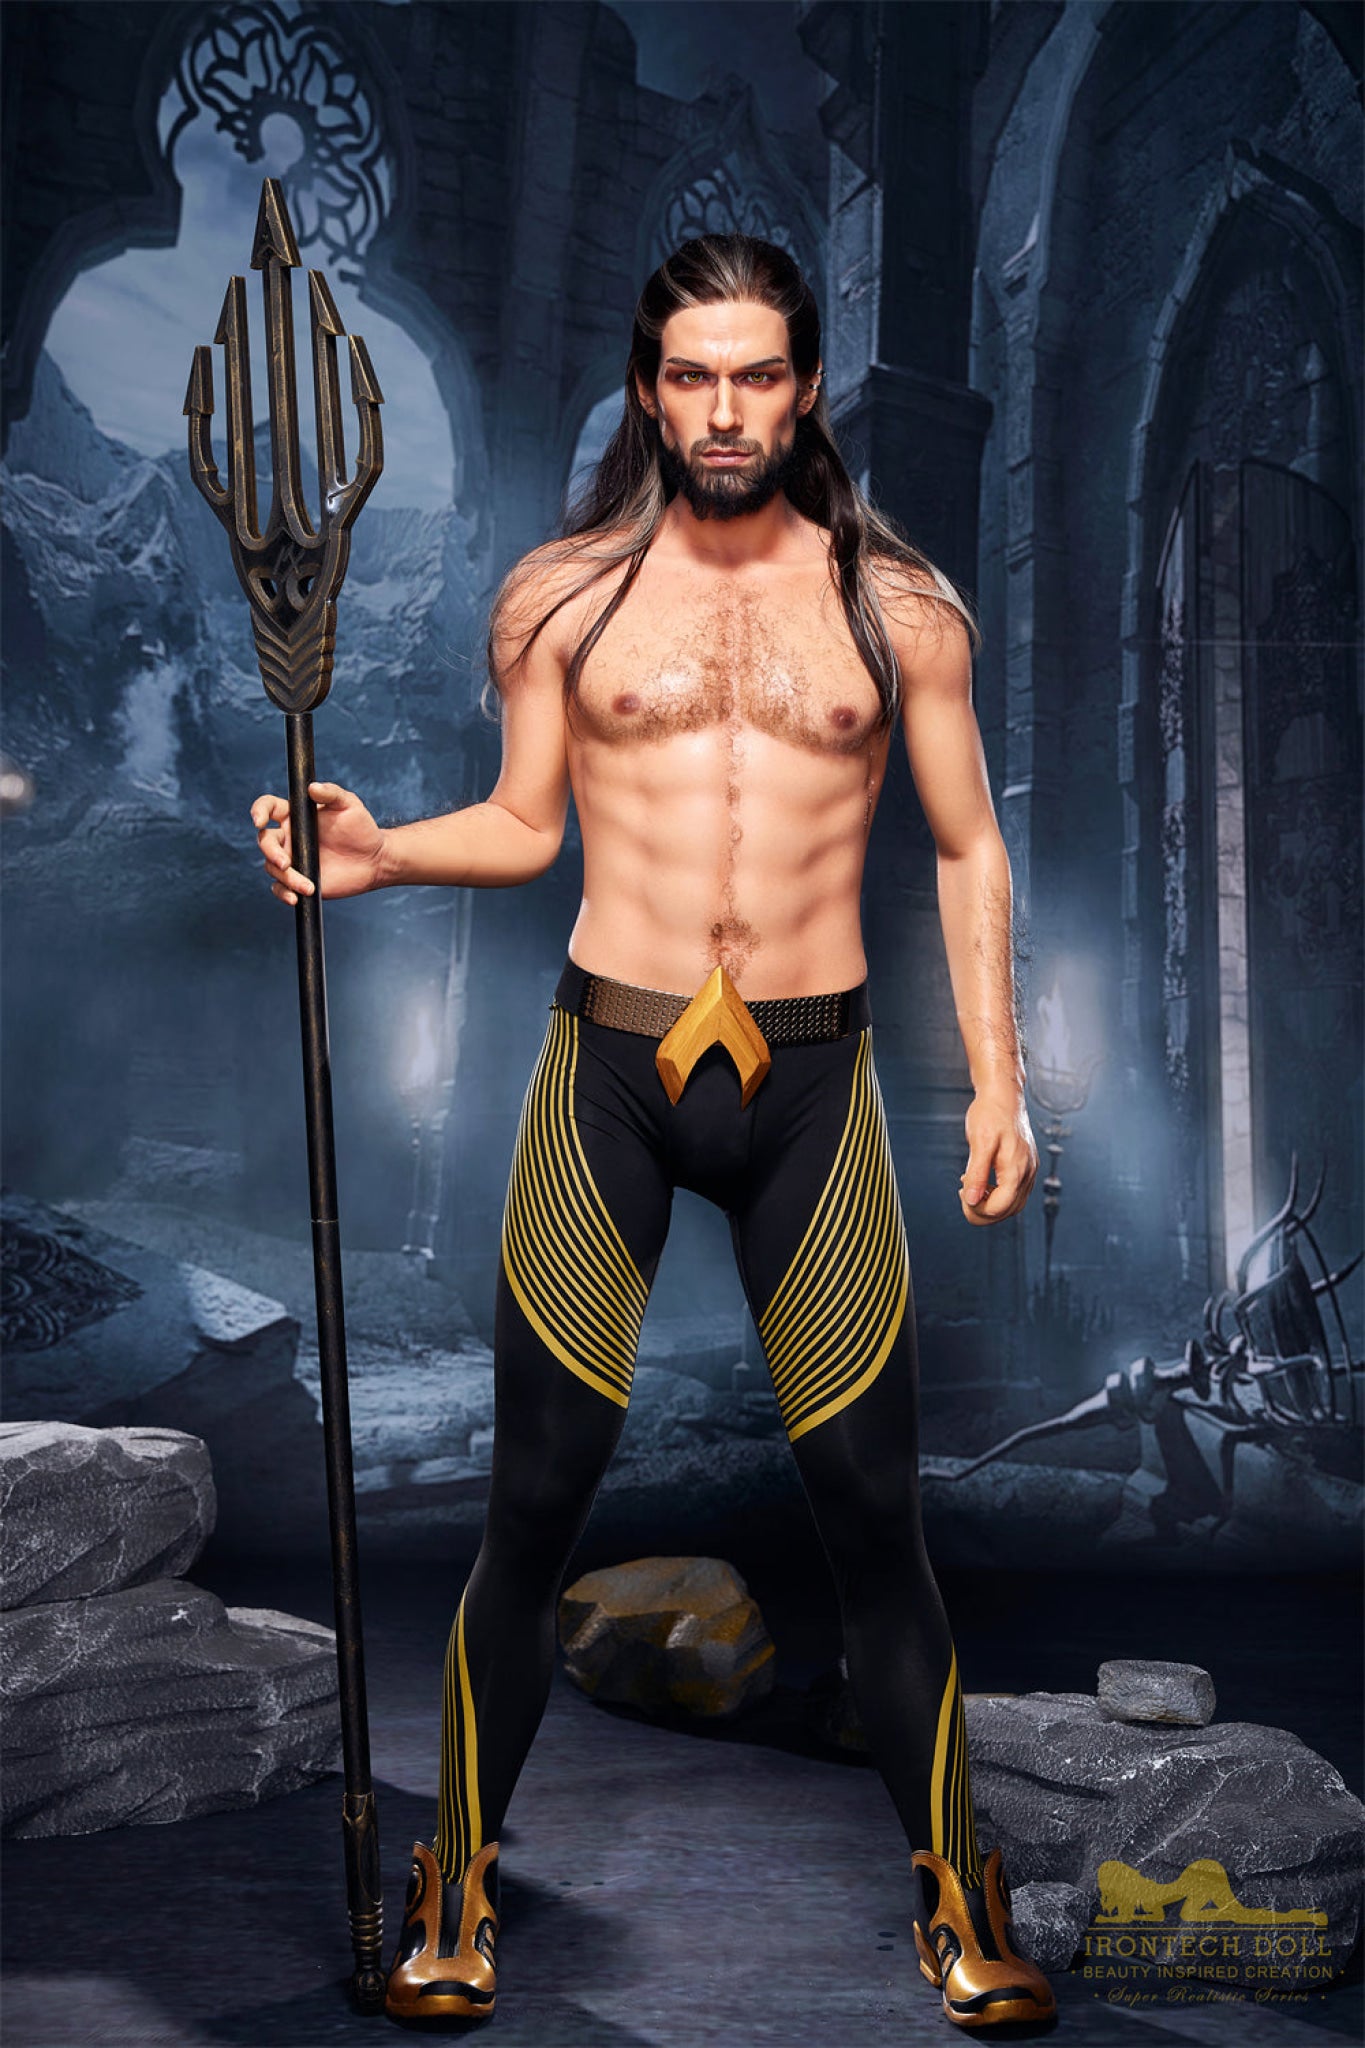 Thomas Aquaman Silicone Male Sex Doll - IronTech Doll® Irontech Doll®